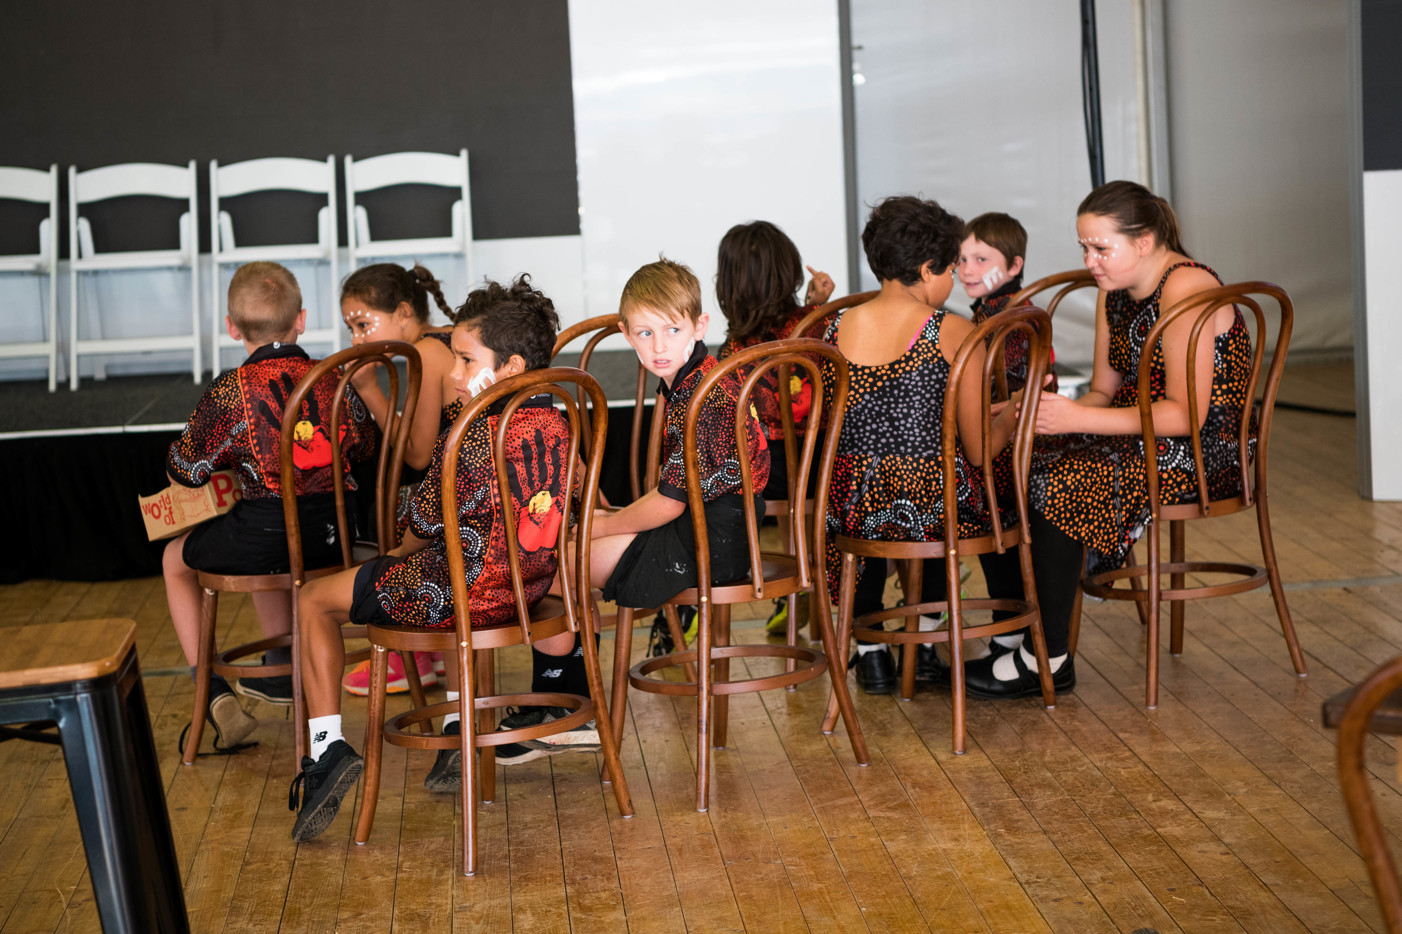 Community sponsorship benefits a youth group for NAIDOC week.